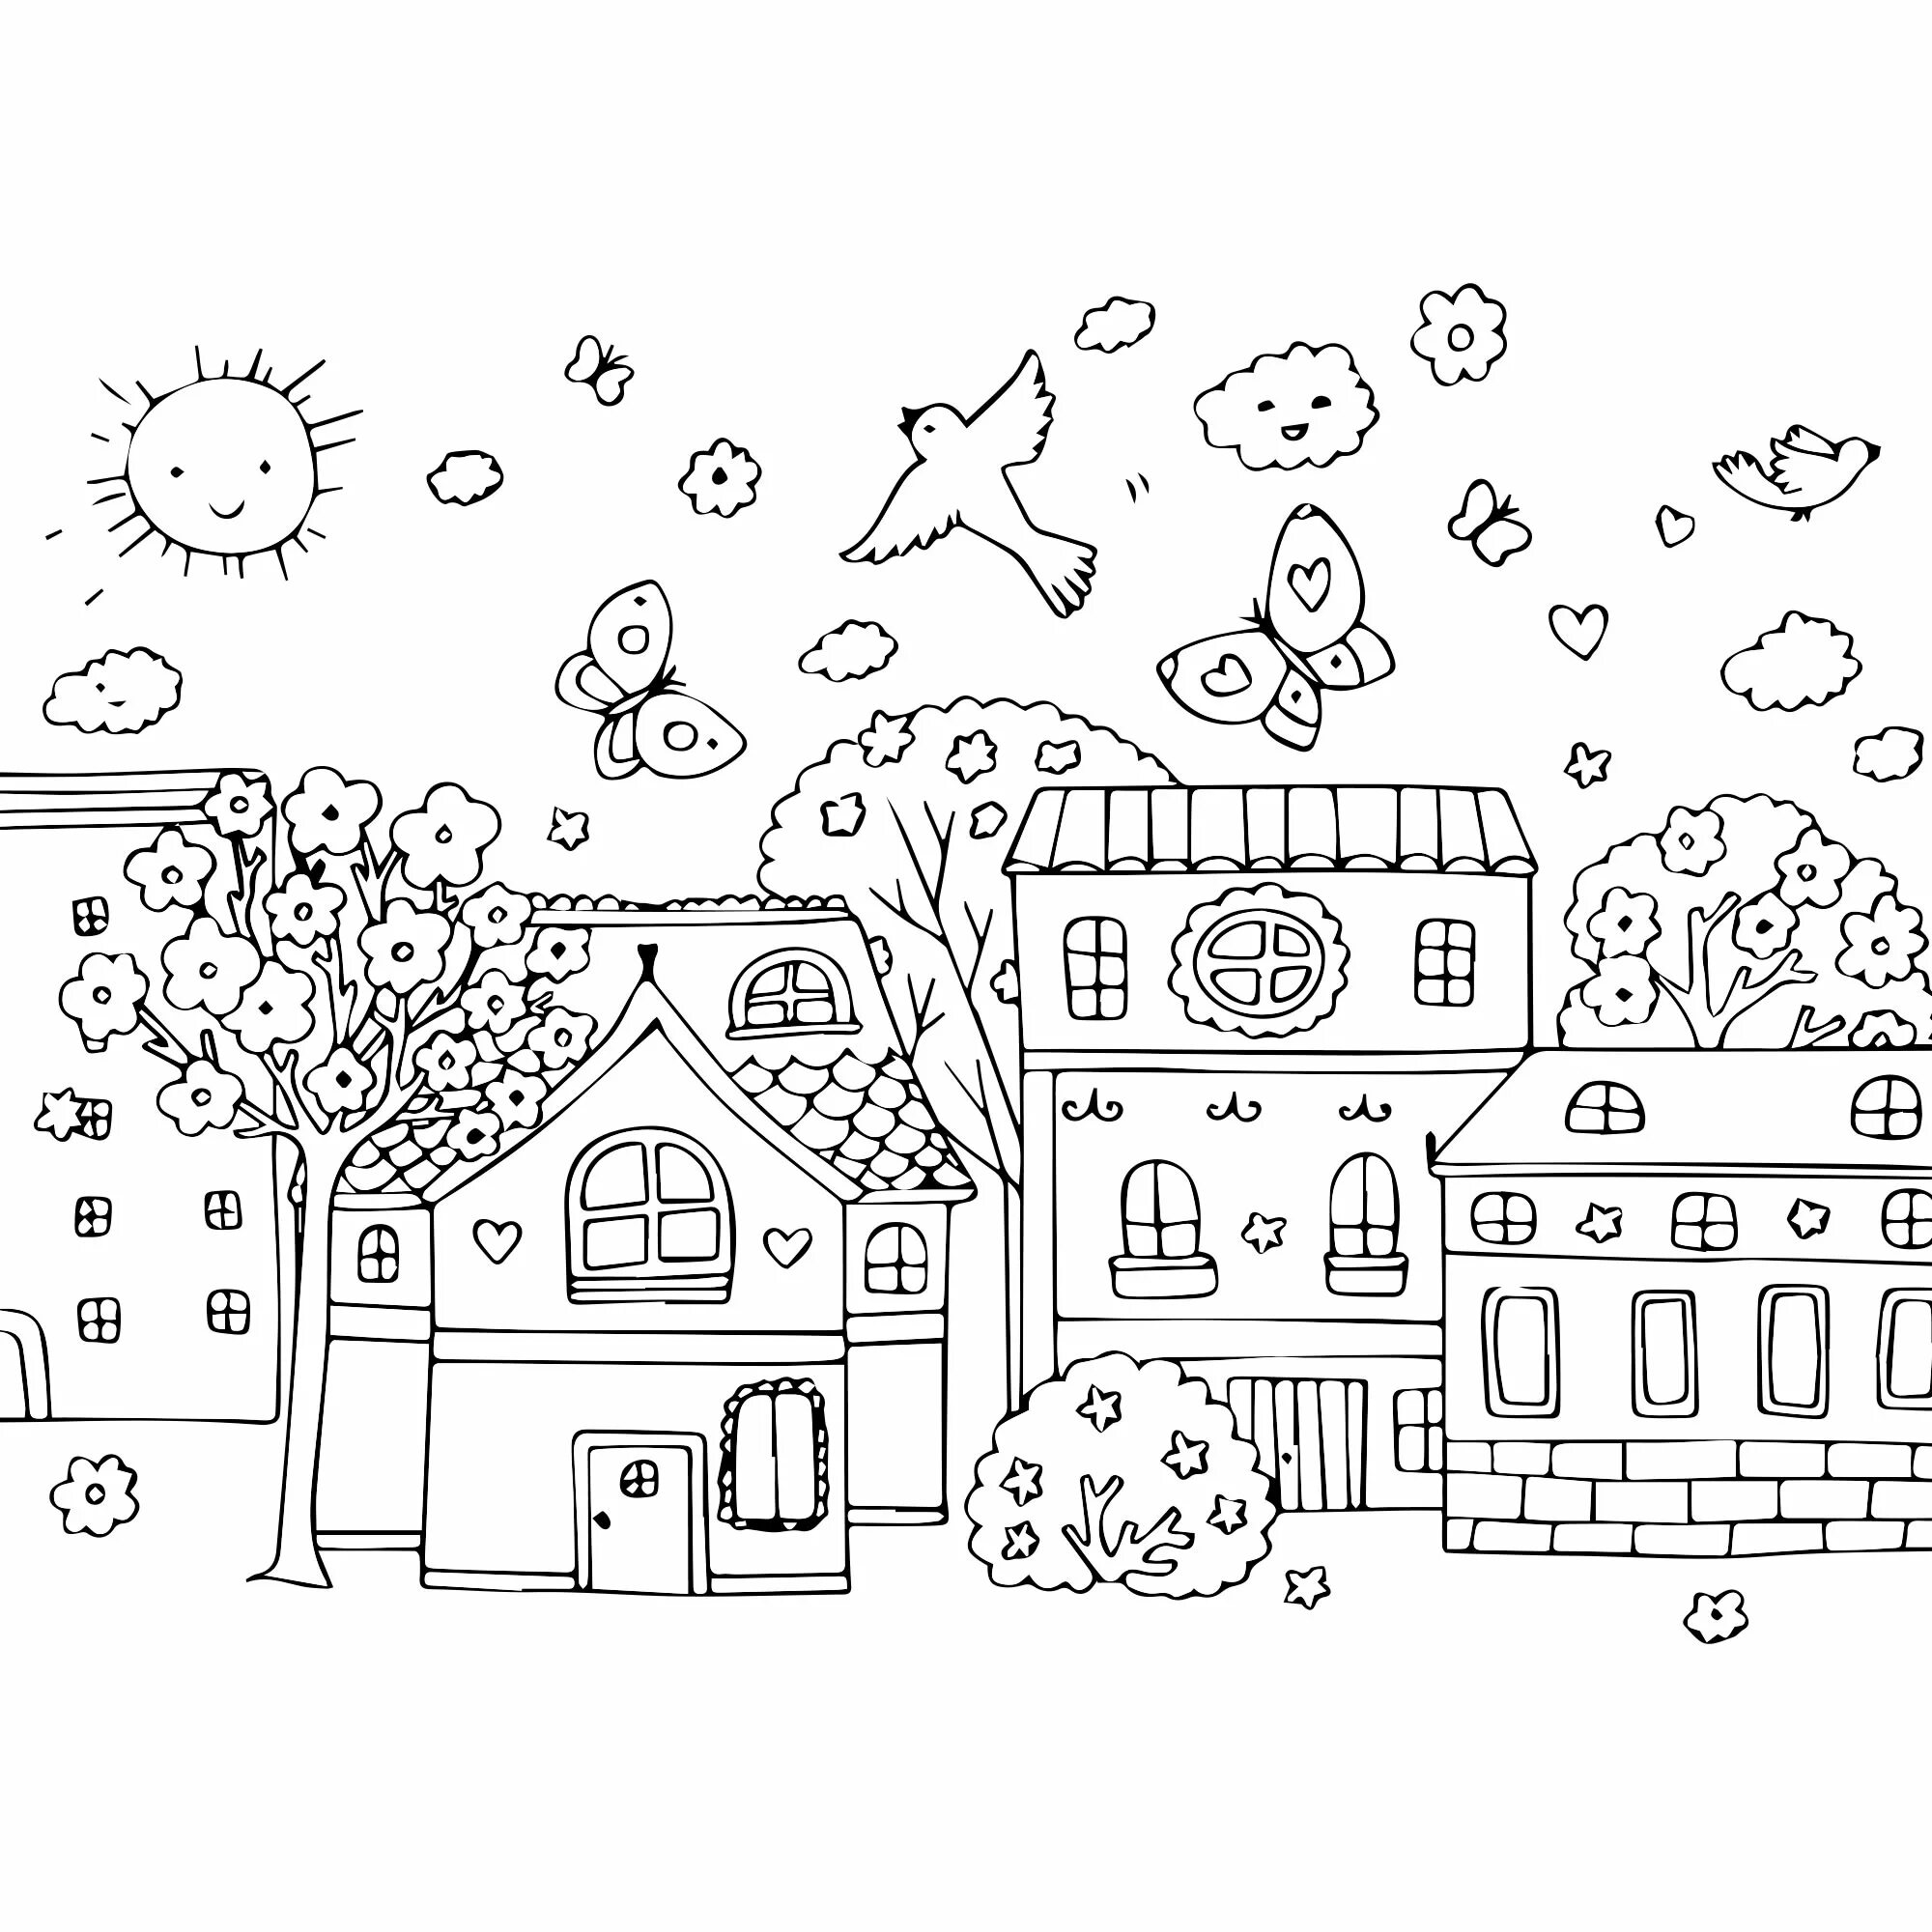 Color-mania city coloring page for children 3-4 years old